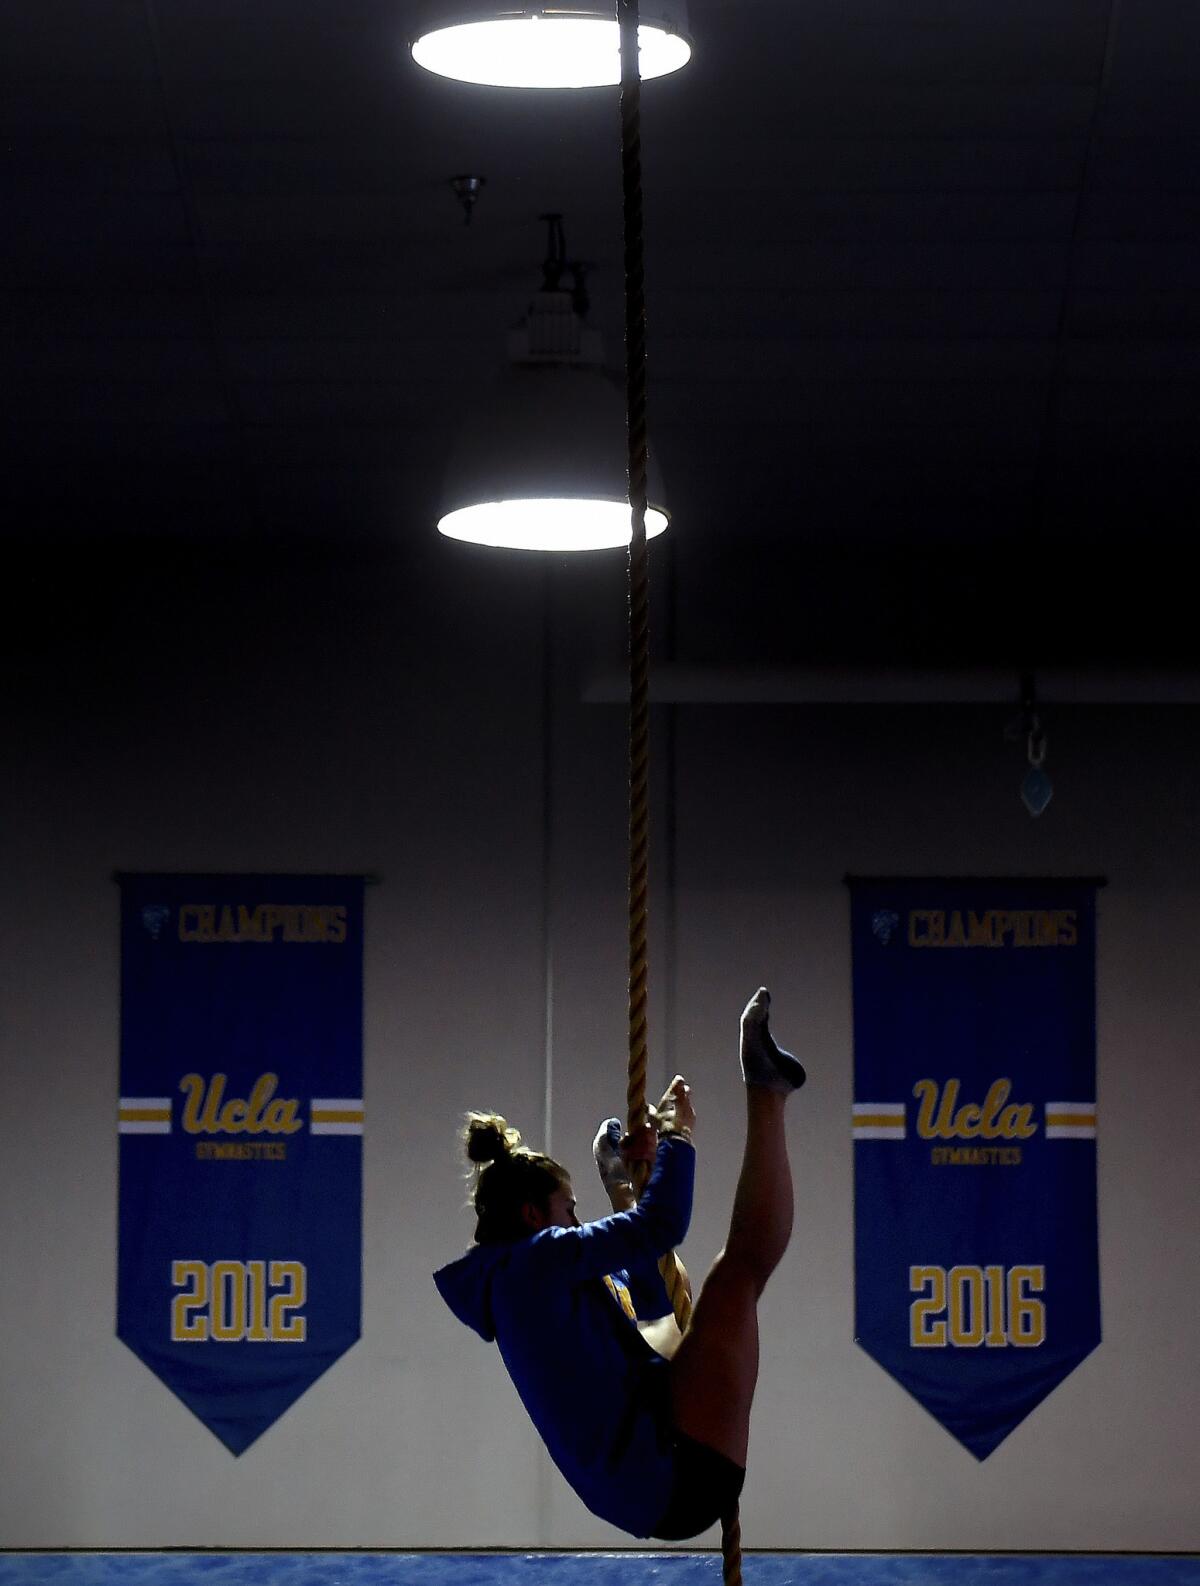 UCLA's Pauline Tratz climbs a rope during a workout on the UCLA campus.